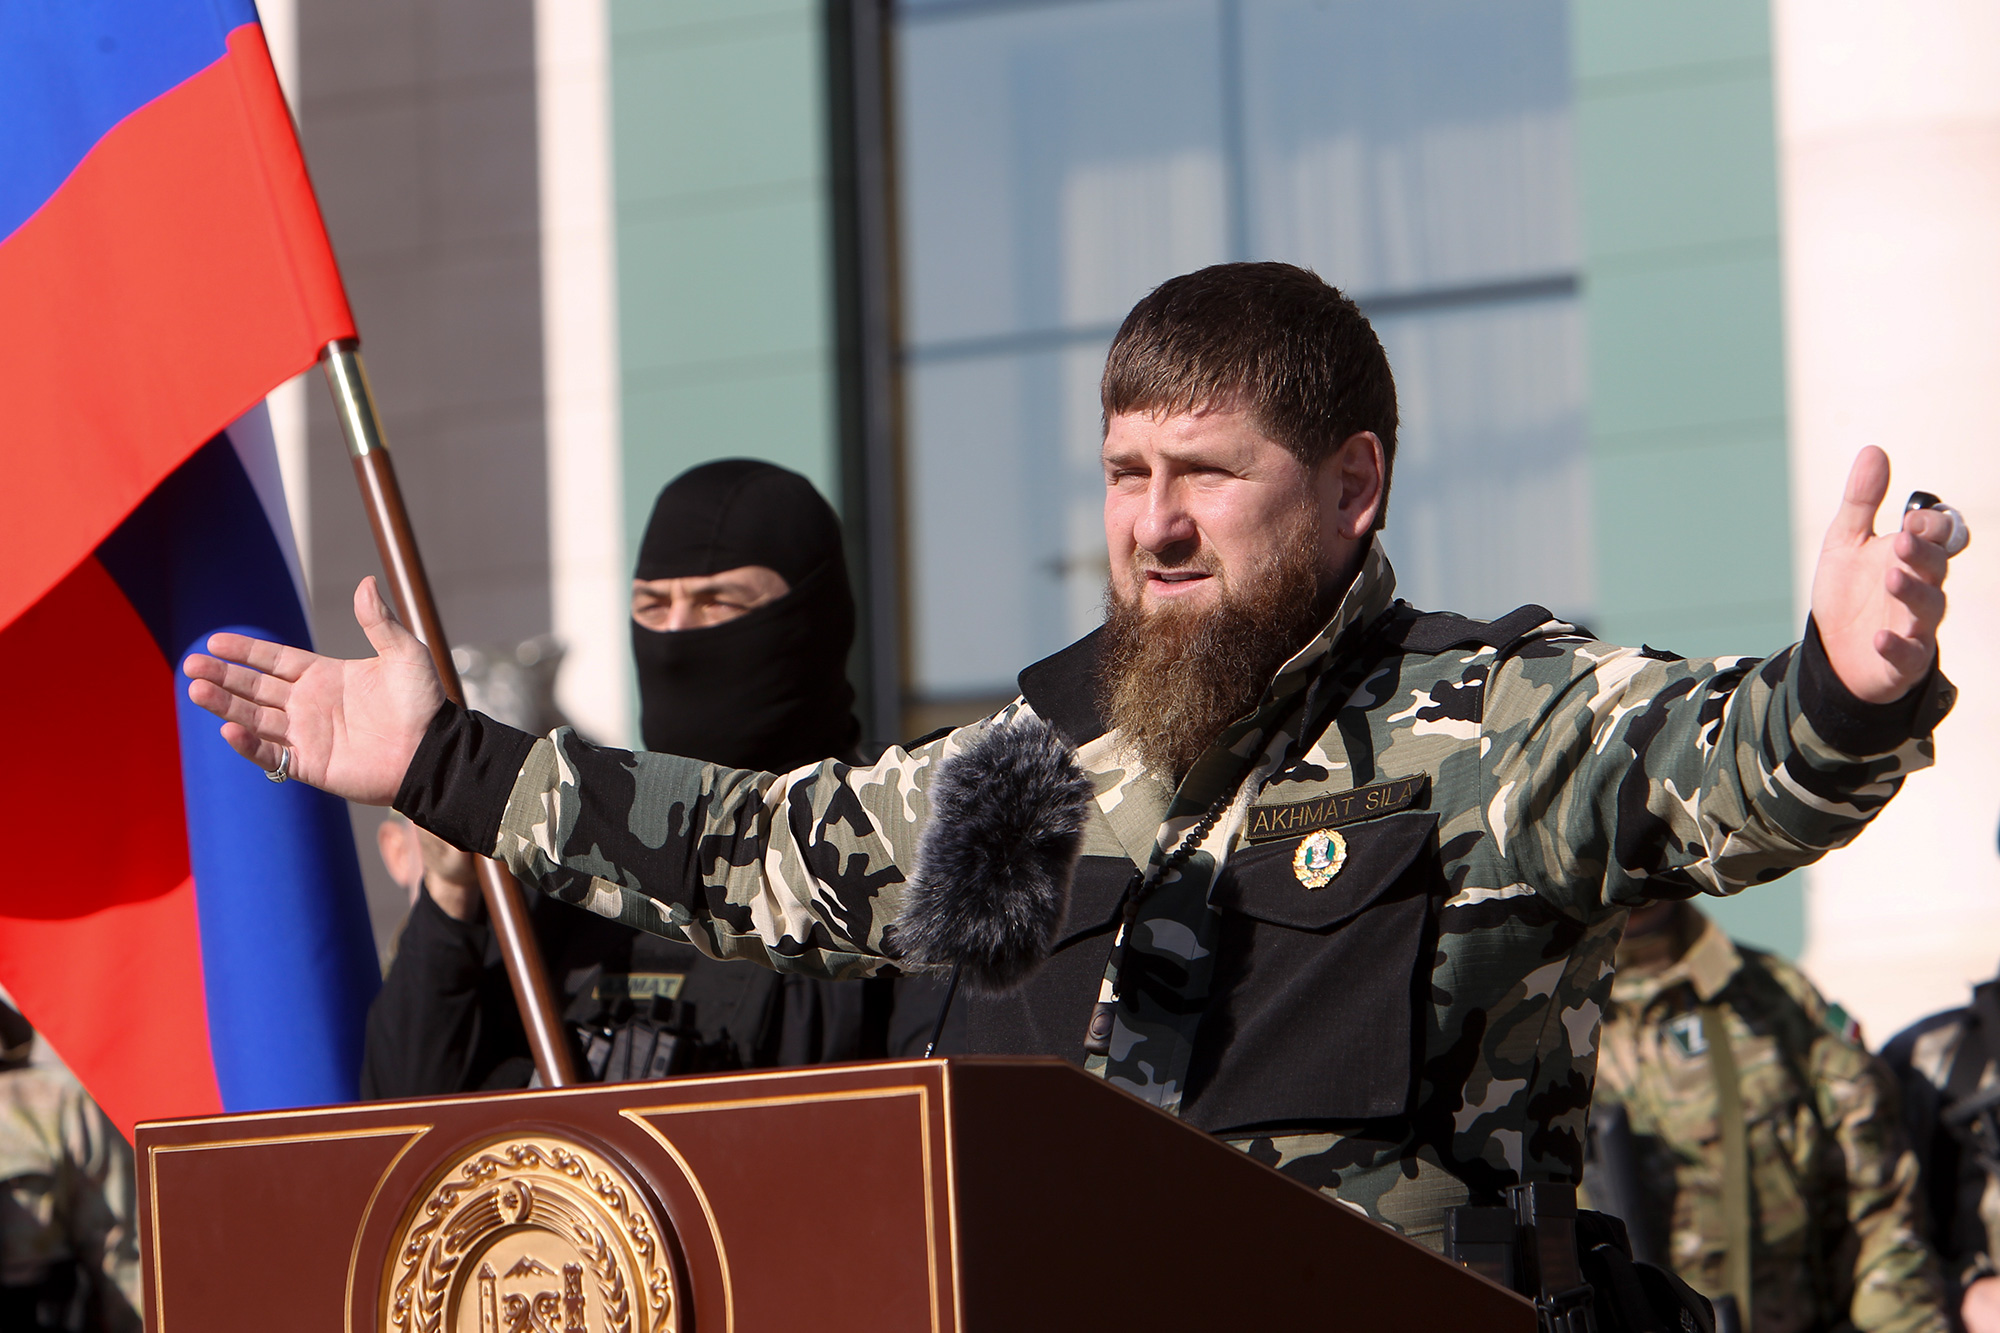 Ramzan Kadyrov, leader of the Russian province of Chechnya gestures speaking to about 10,000 troops in Chechnya's regional capital of Grozny, Russia, on Tuesday, March 29, 2022.